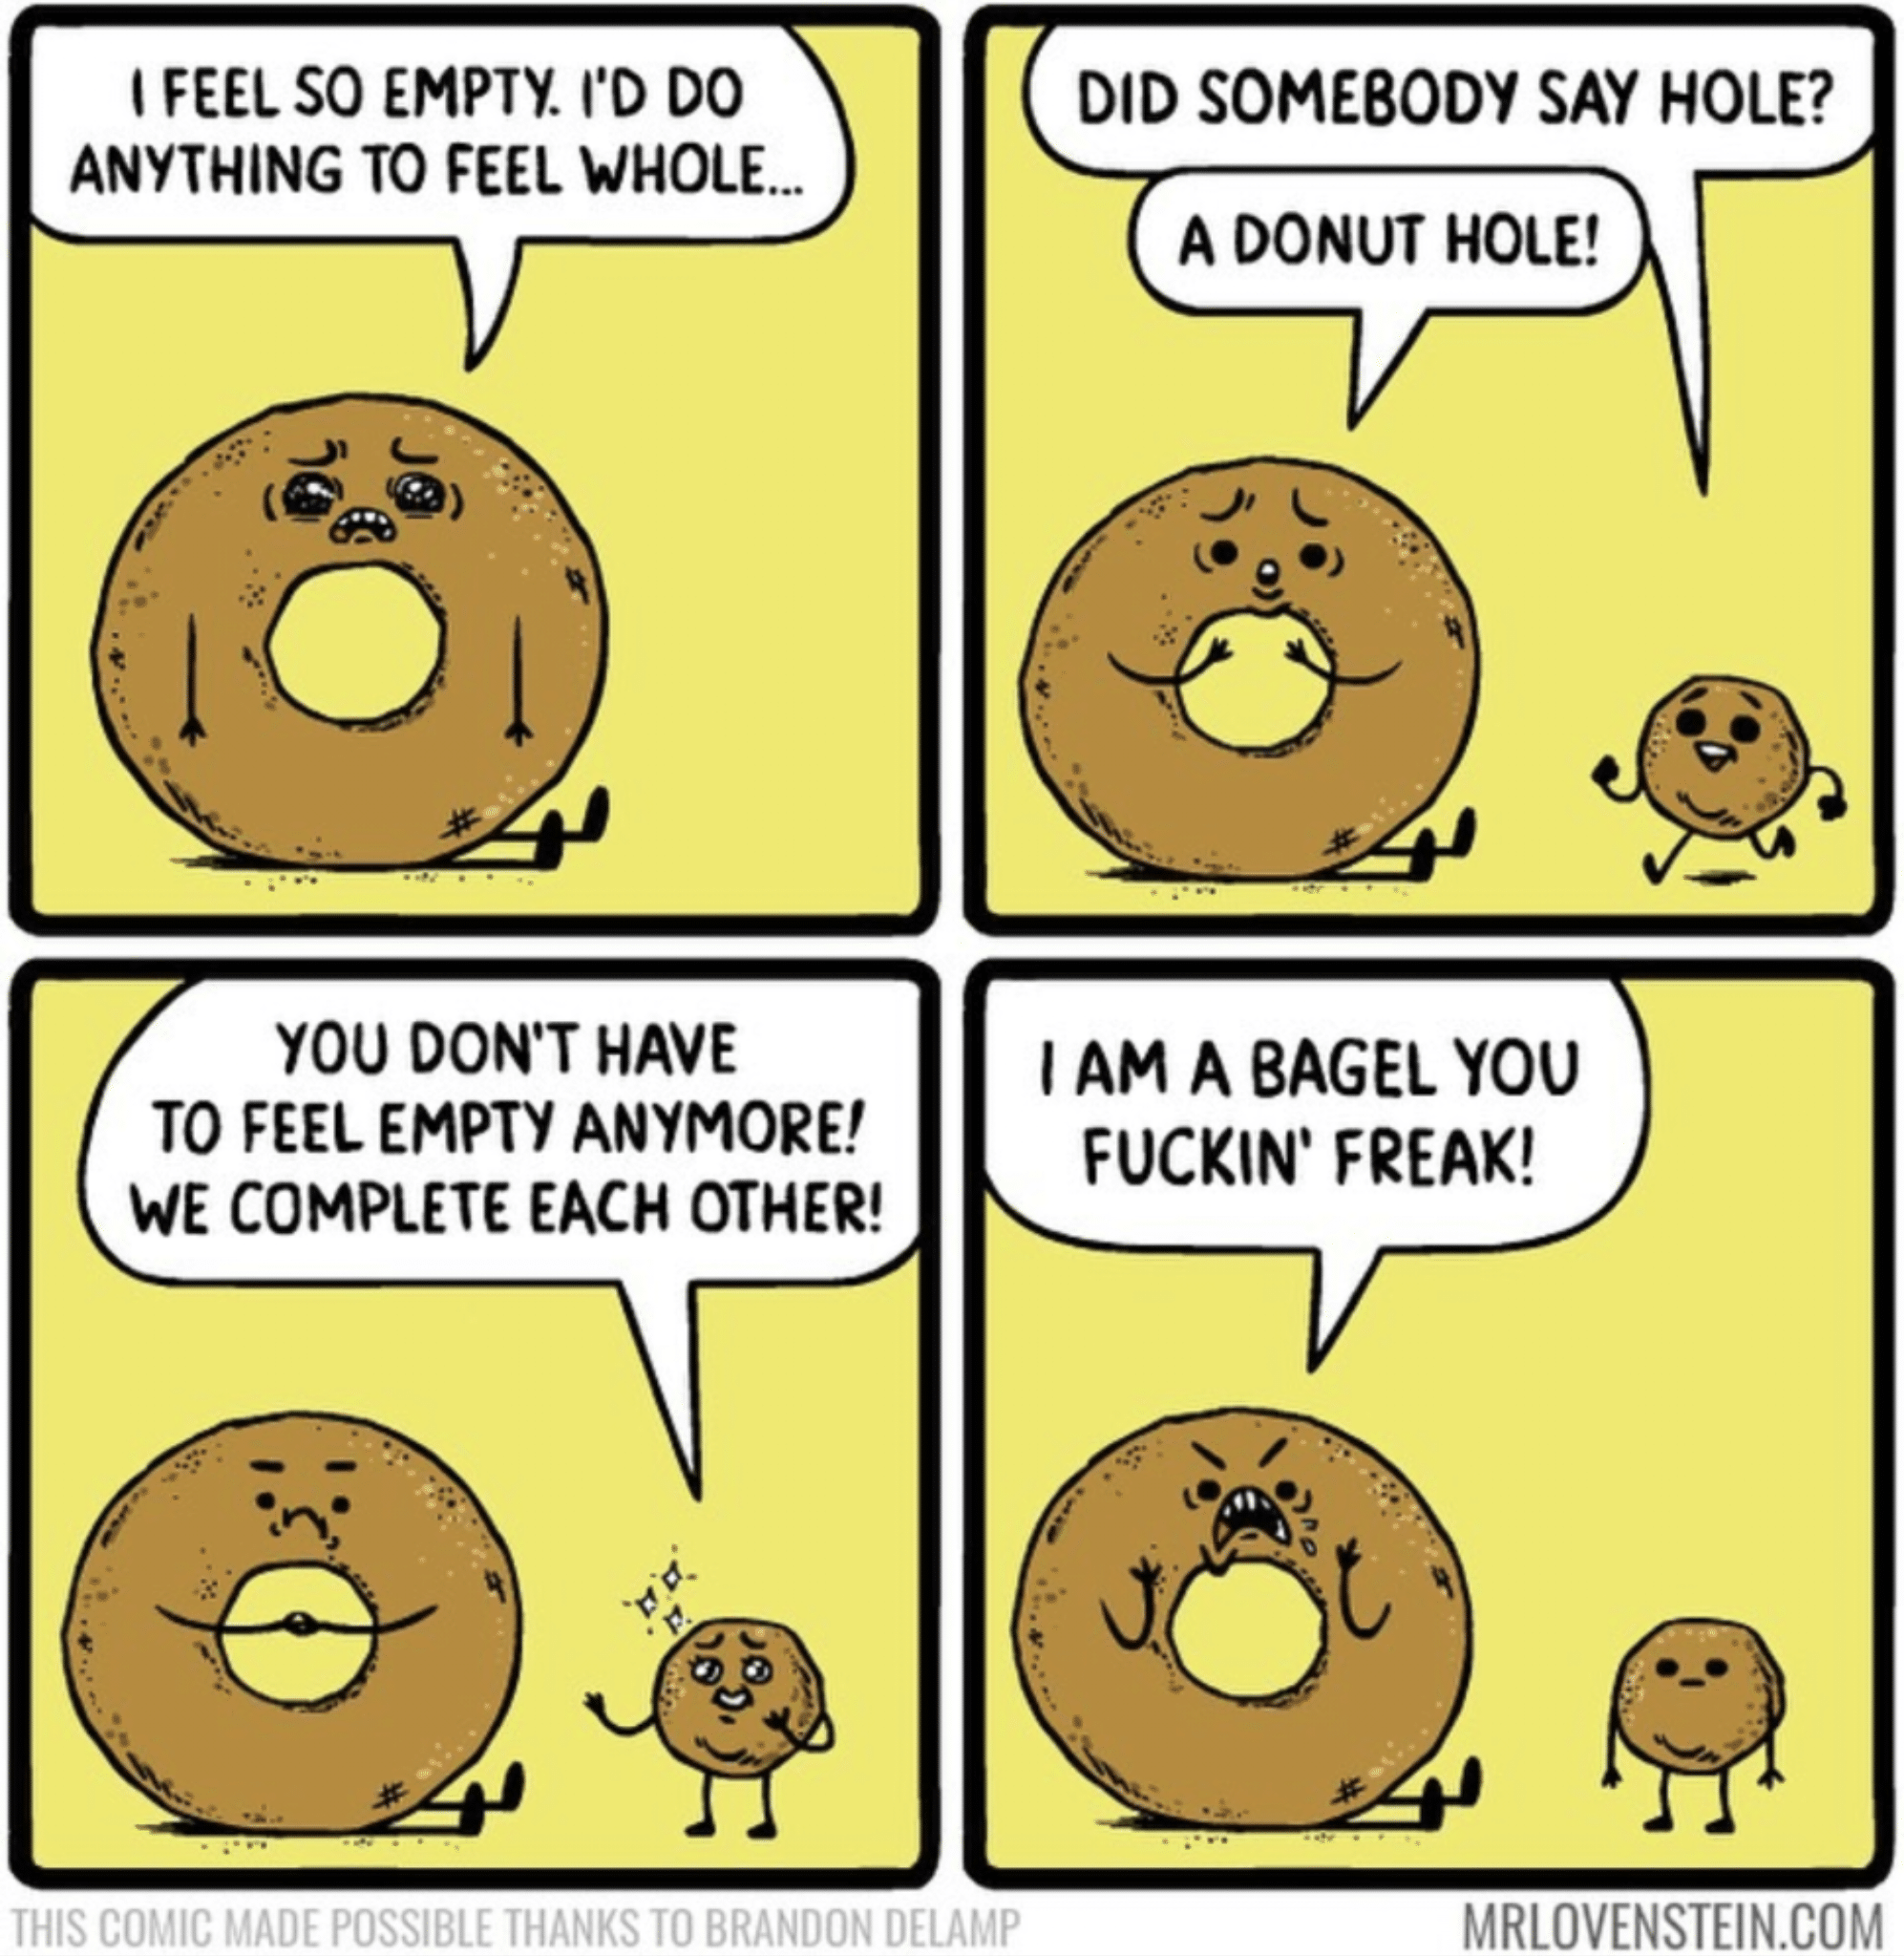 A hole,  Comics A hole,  text: I FEEL SO EMPTY I'D DO ANYTHING TO FEEL WHOLE.„ YOU DON'T HAVE TO FEEL EMPTY ANYMORE! WE COMPLETE EACH OTHER! THIS POSSIBLE THANKS TO BRANDON DID SOMEBODY SAY HOLE? A DONUT HOLE! I AM A BAGEL YOU FUCKlNt FREAK! MRLOVENSTEIN.COM 